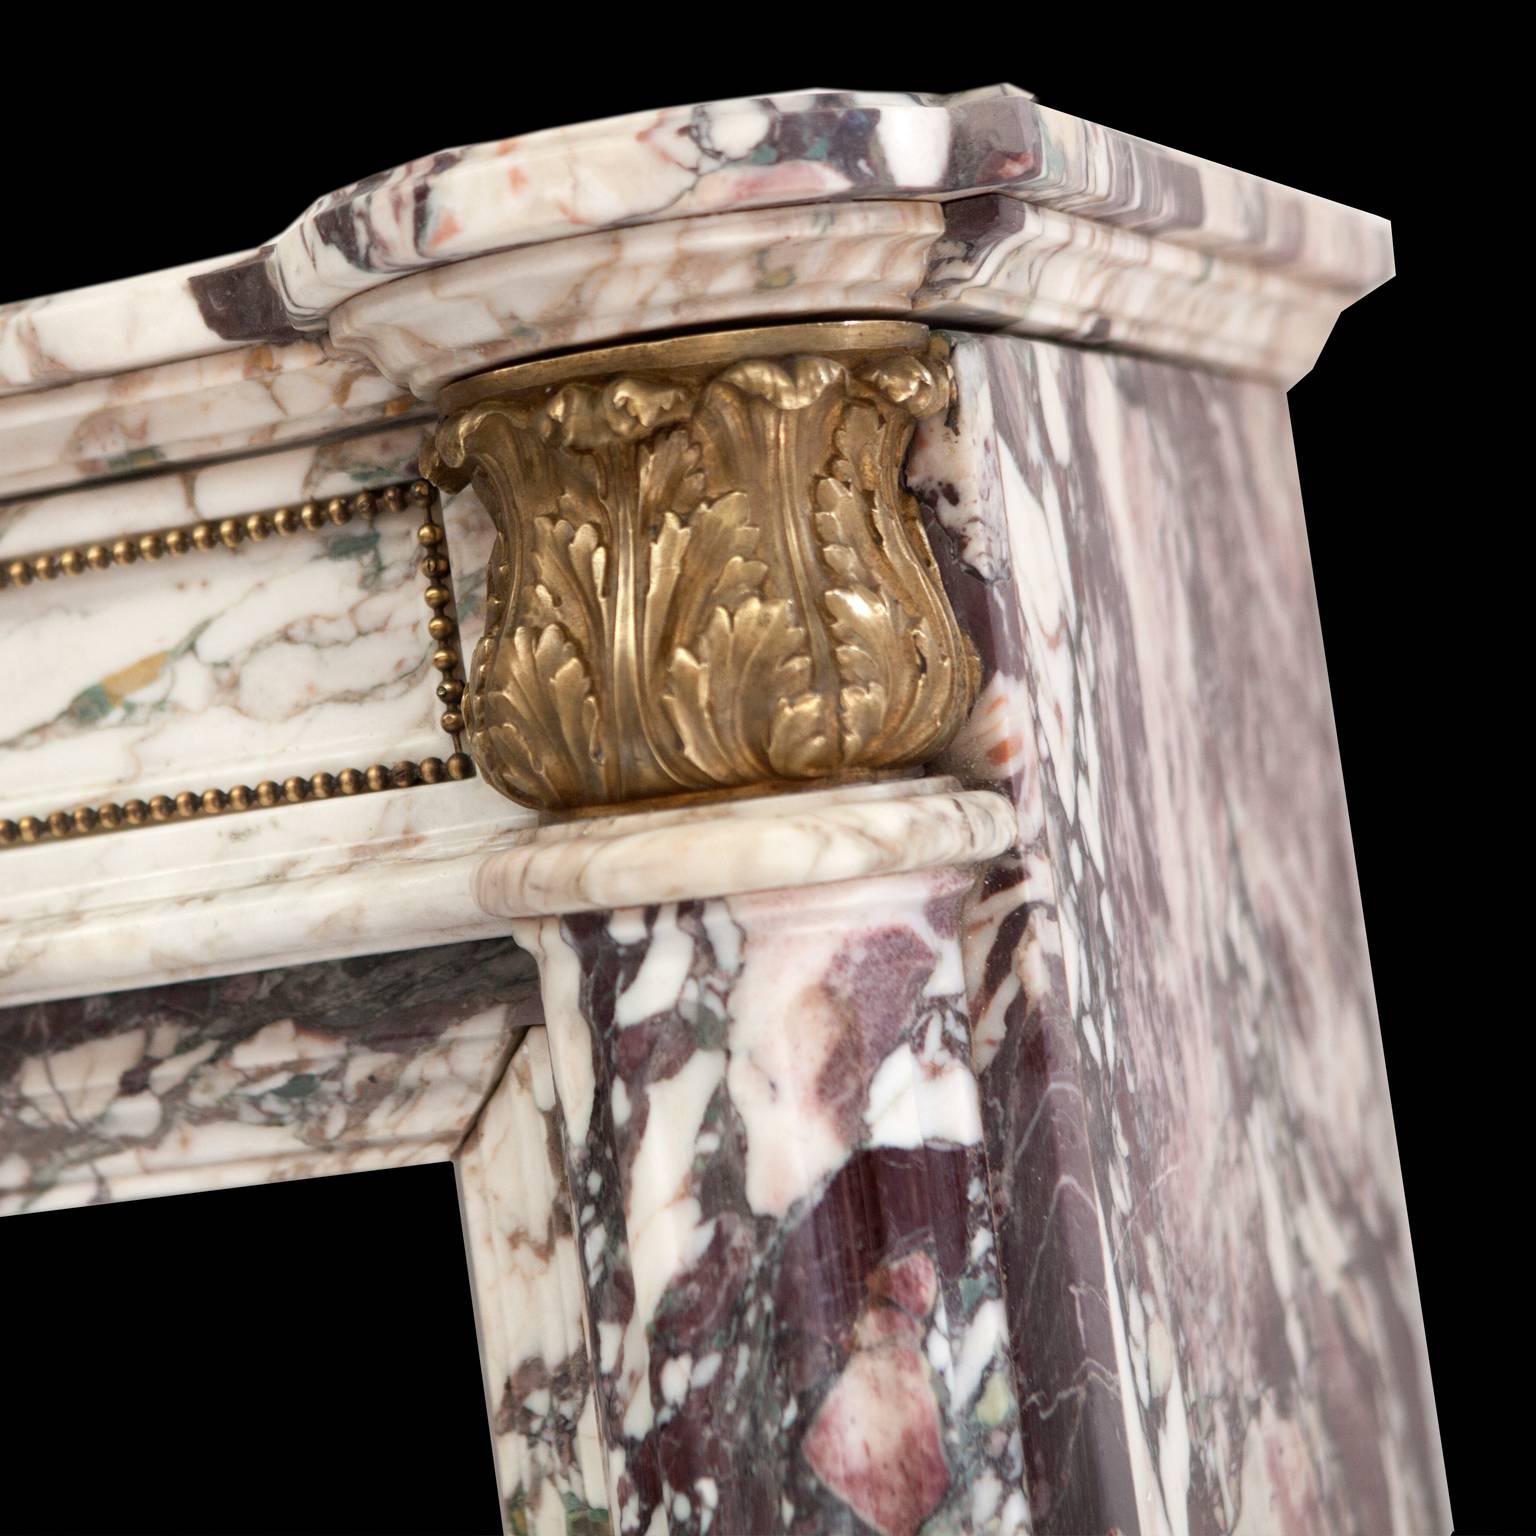 19th Century Antique Empire Rare Breche Marble Fireplace Mantel With Guilt Ormolu Mounts And Acanthus Leaf Capitals.